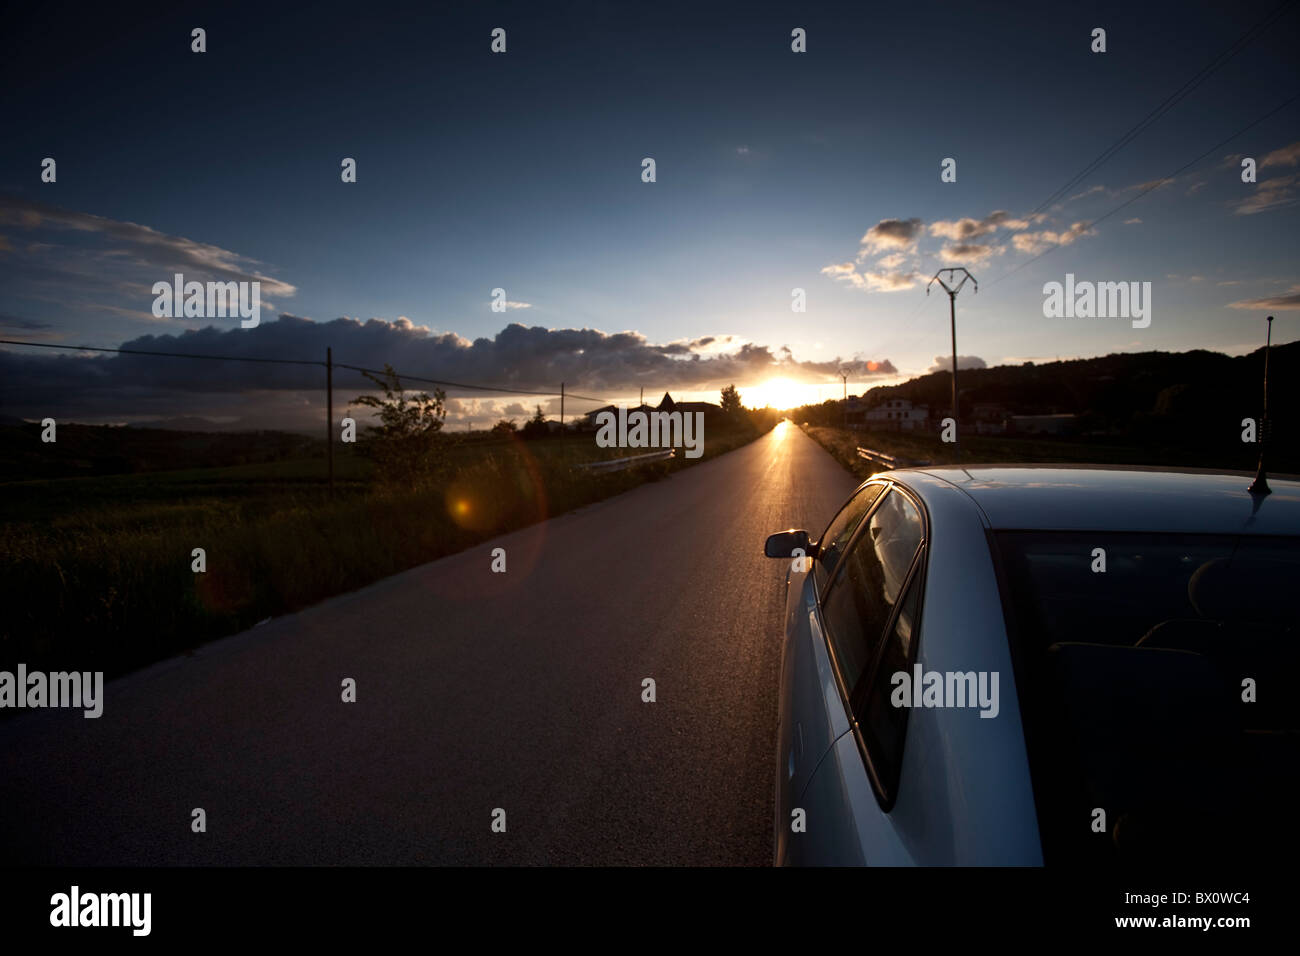 car on the road in sunset Stock Photo